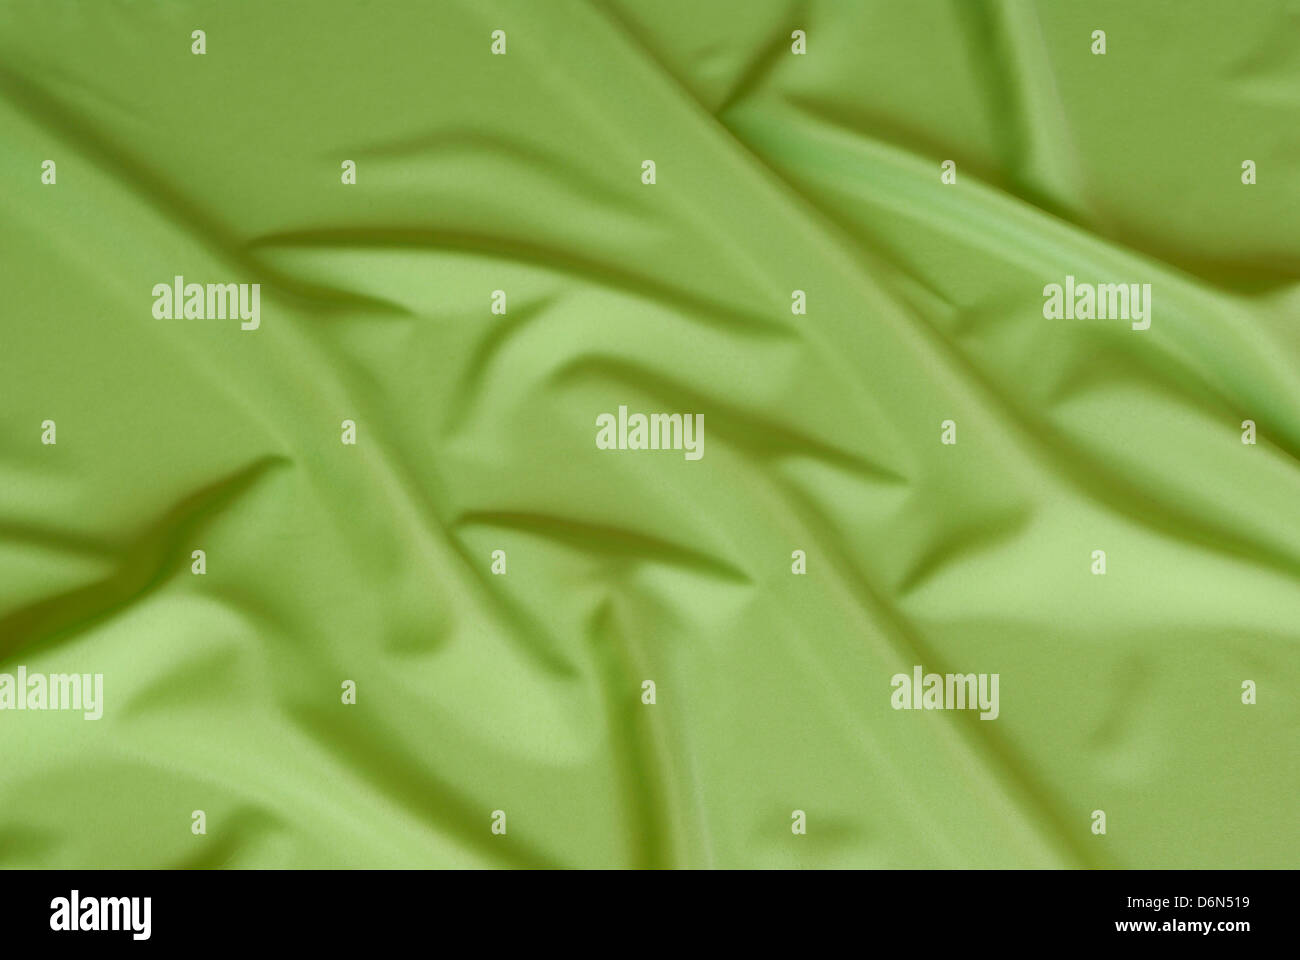 arranged green and silky cloth as background Stock Photo